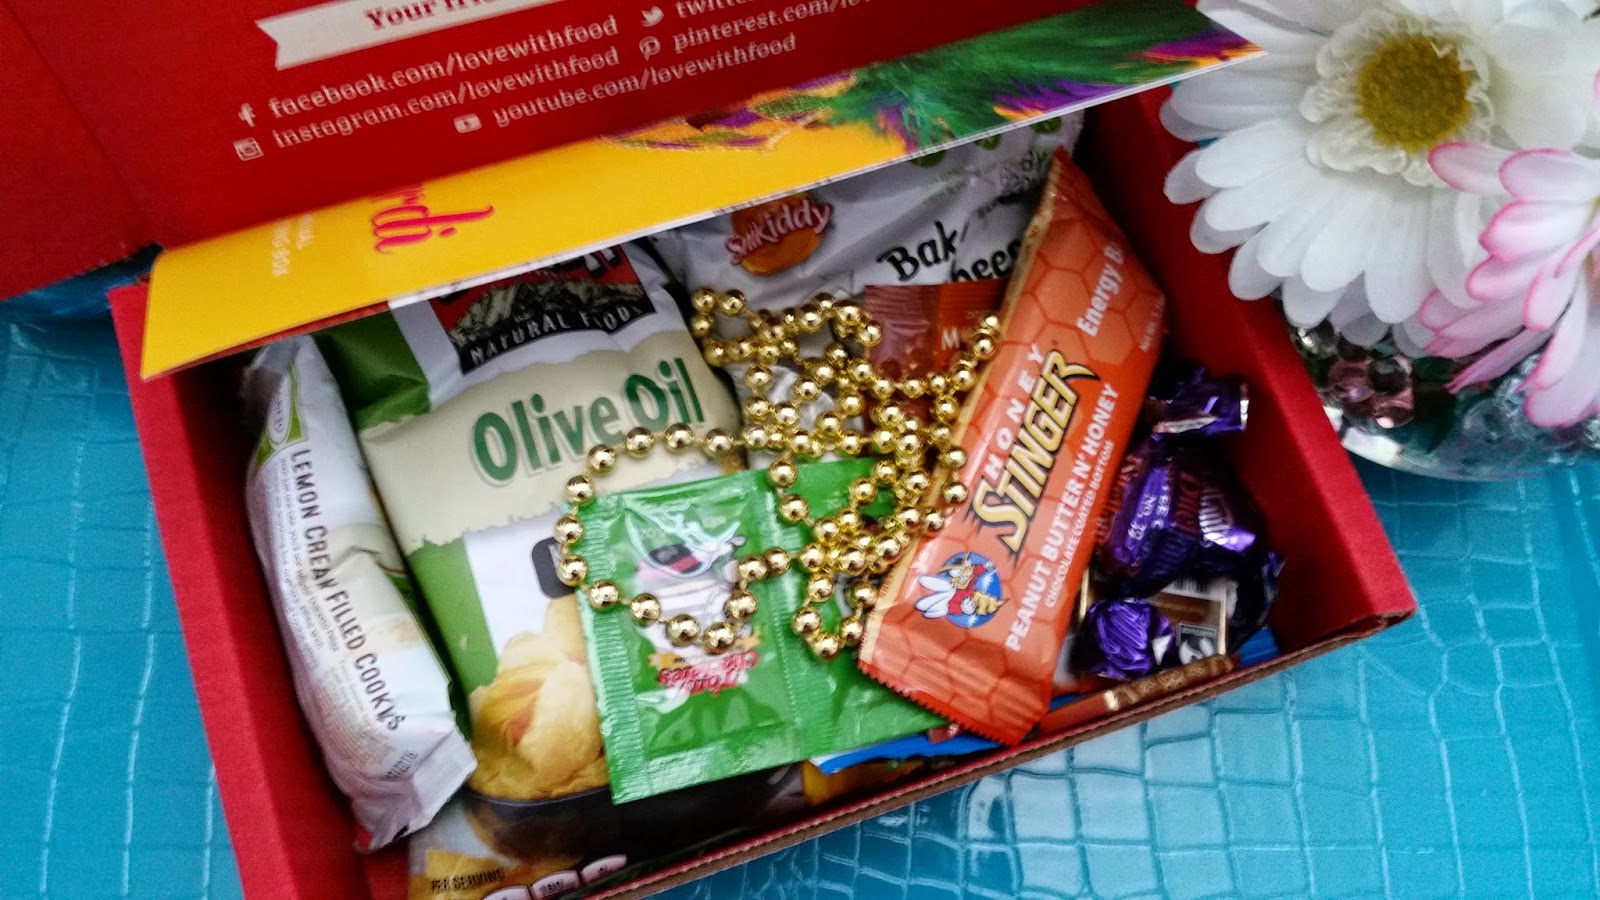 Review: February Love With Food Box